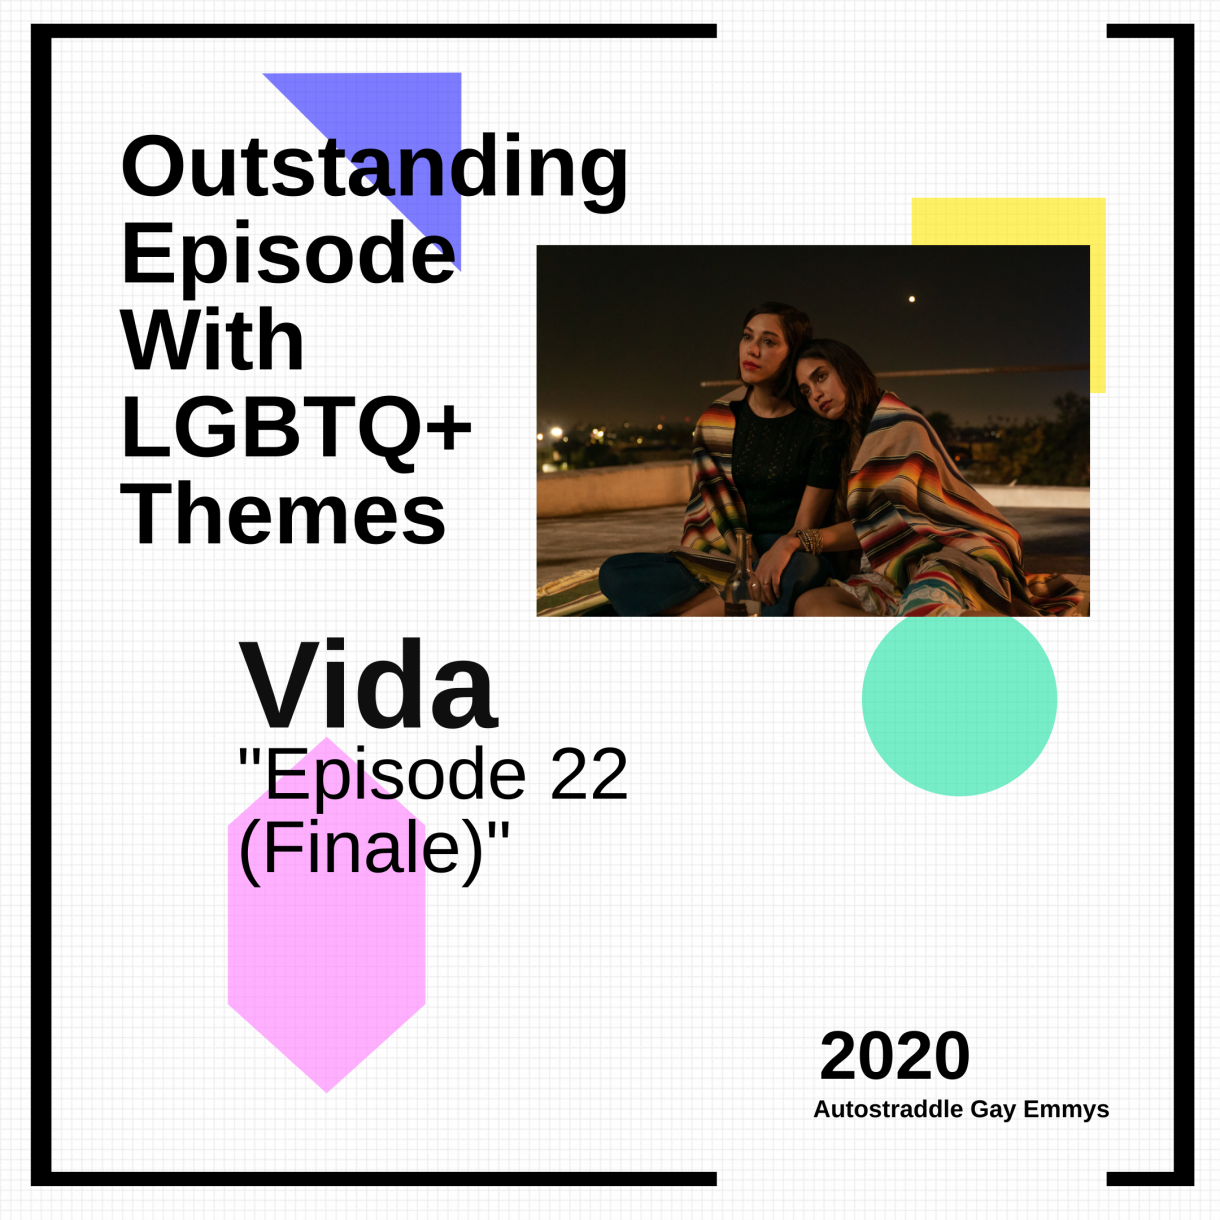 Best TV Episode With LGBTQ+ Themes: Vida S3E6 “Episode 22